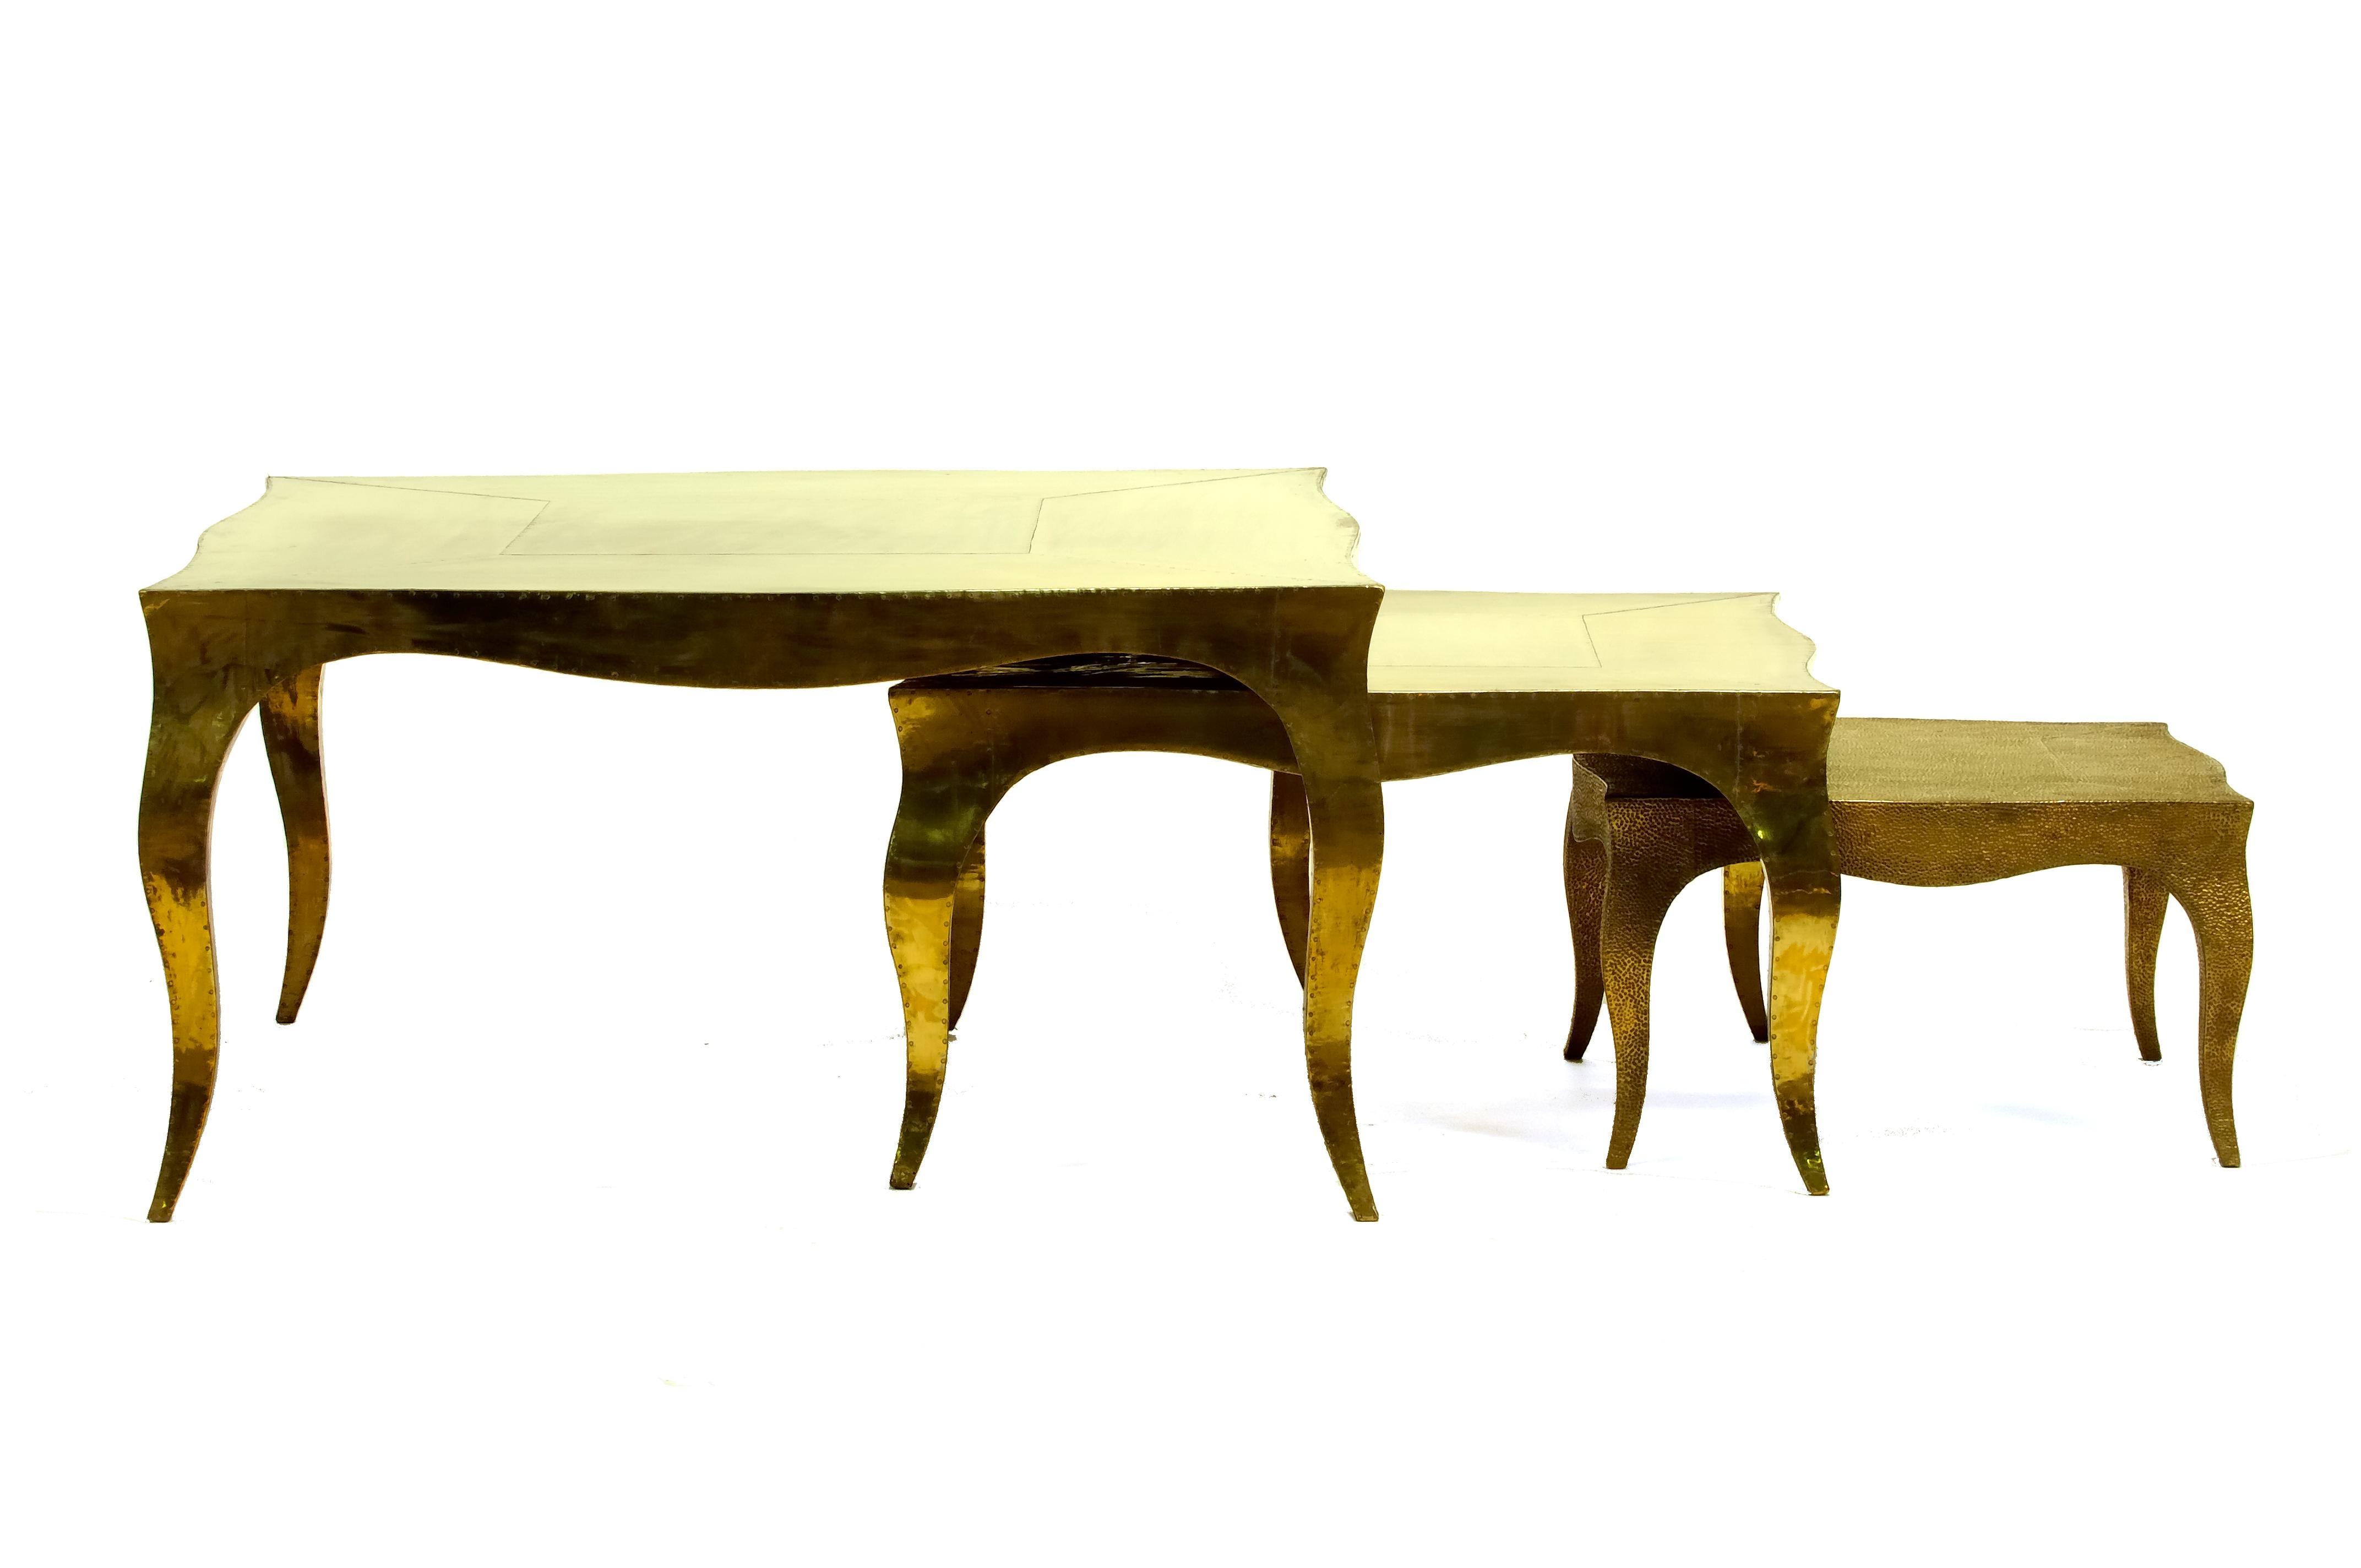 Louise Art Deco Industrial and Work Tables Mid. Hammered Brass by Paul Mathieu For Sale 6